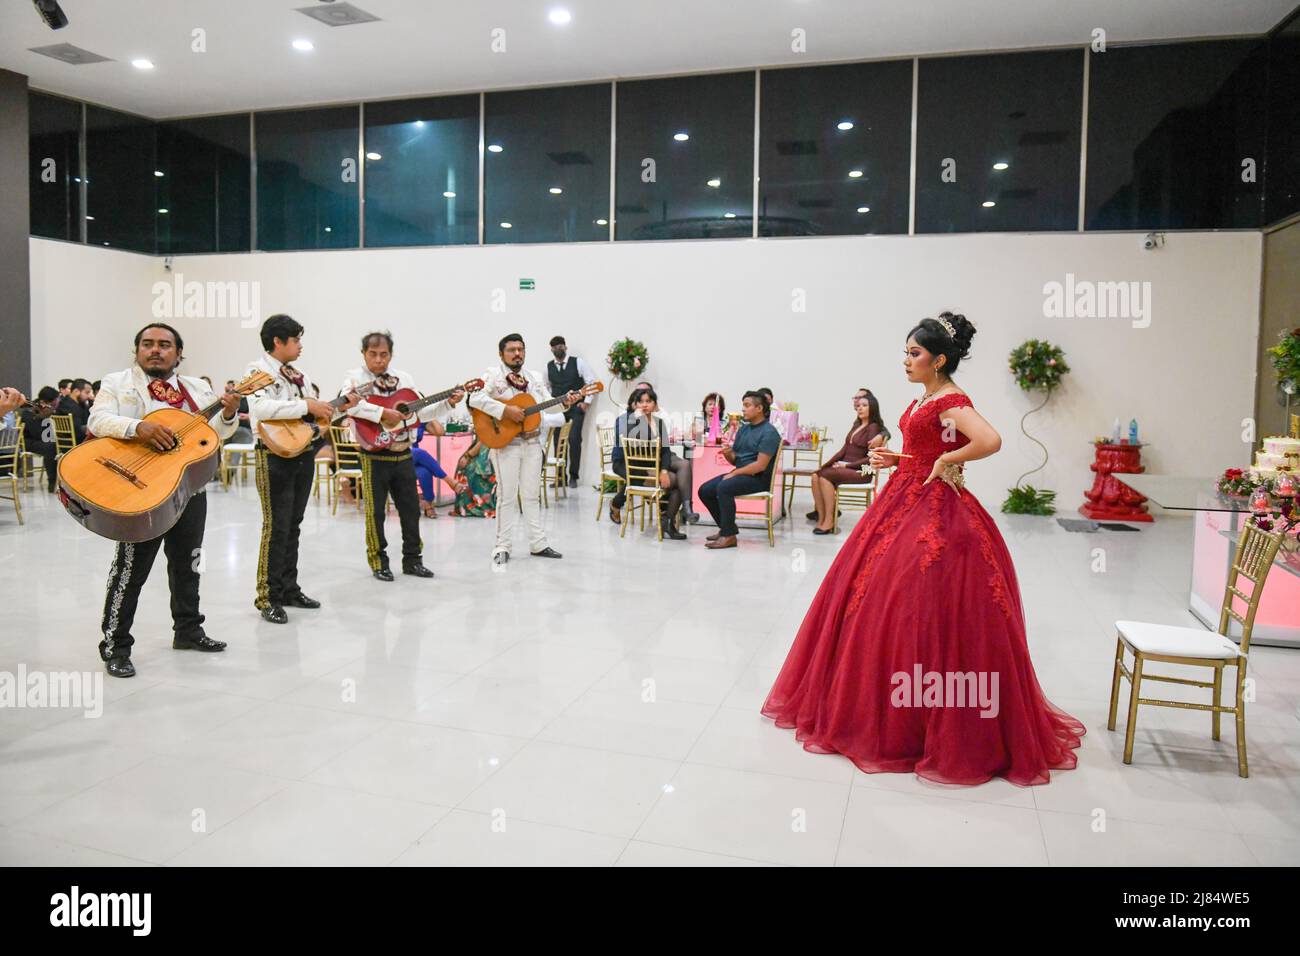 Mariachis celebrate the Quinceañera of a Mexican girl's 15th birthday. This special occasion is celebrated by girls throughout Latin America / Campeche, Mexico Stock Photo